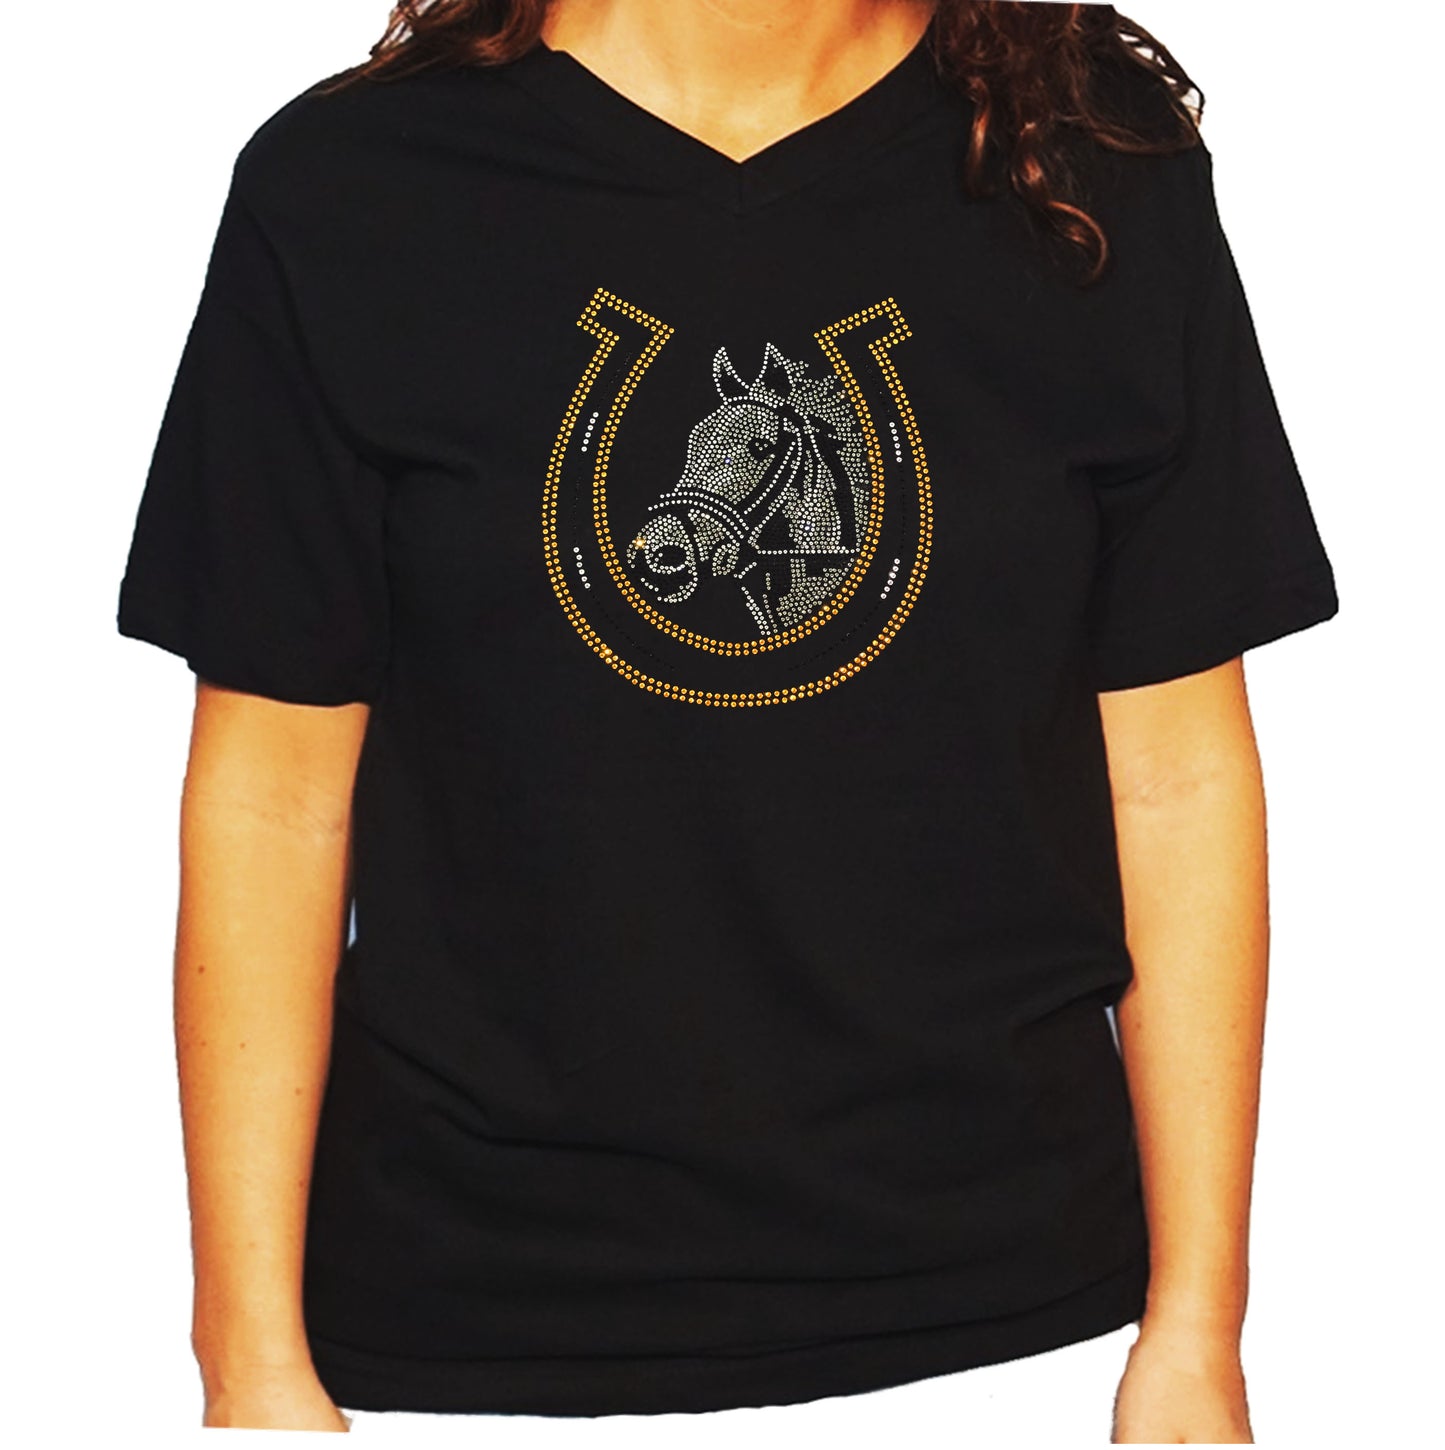 Women's / Unisex T-Shirt with Horse and  Lucky Horseshoe - Equestrian in Rhinestones